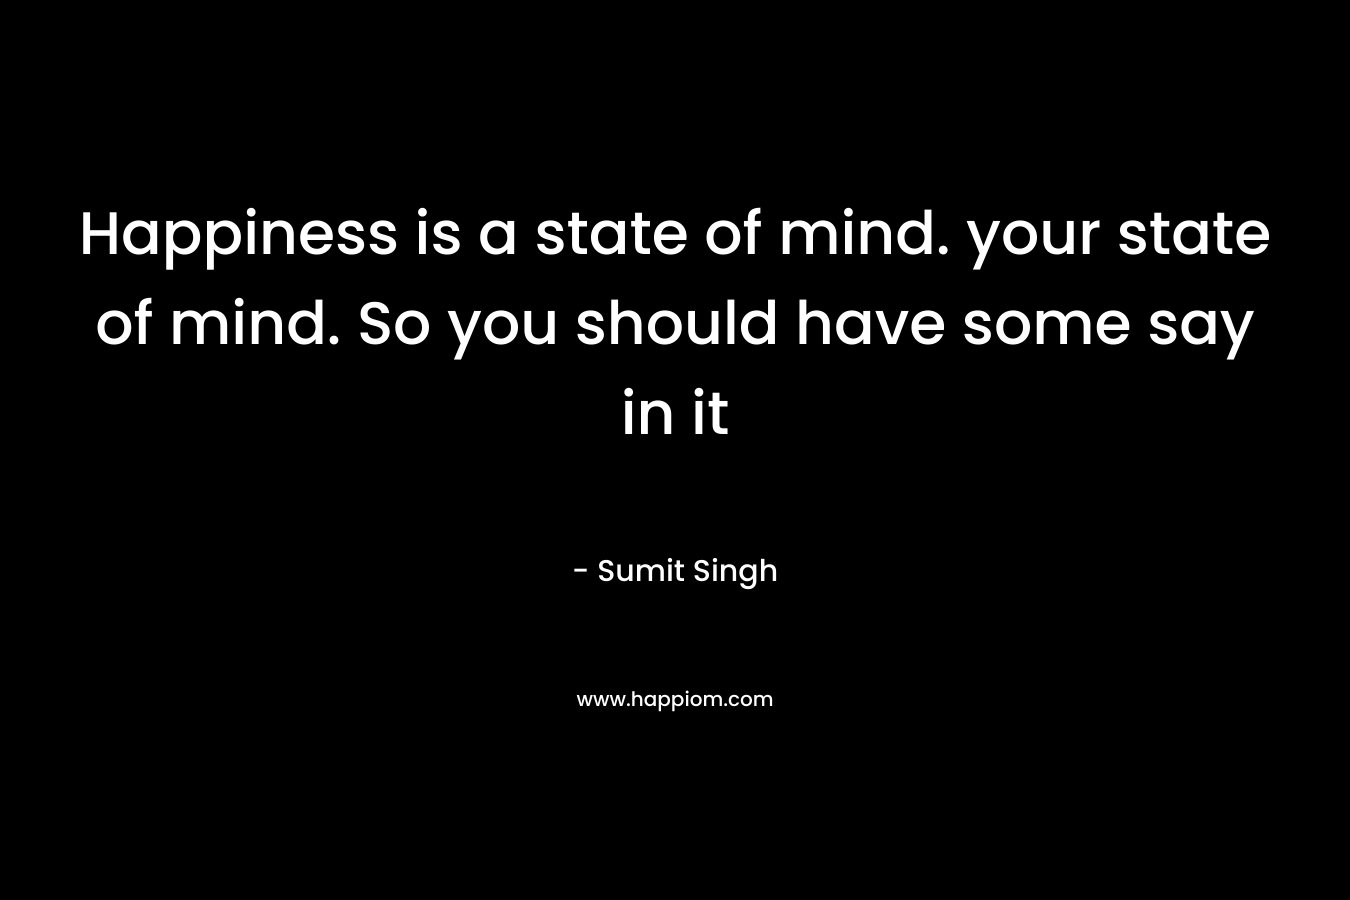 Happiness is a state of mind. your state of mind. So you should have some say in it